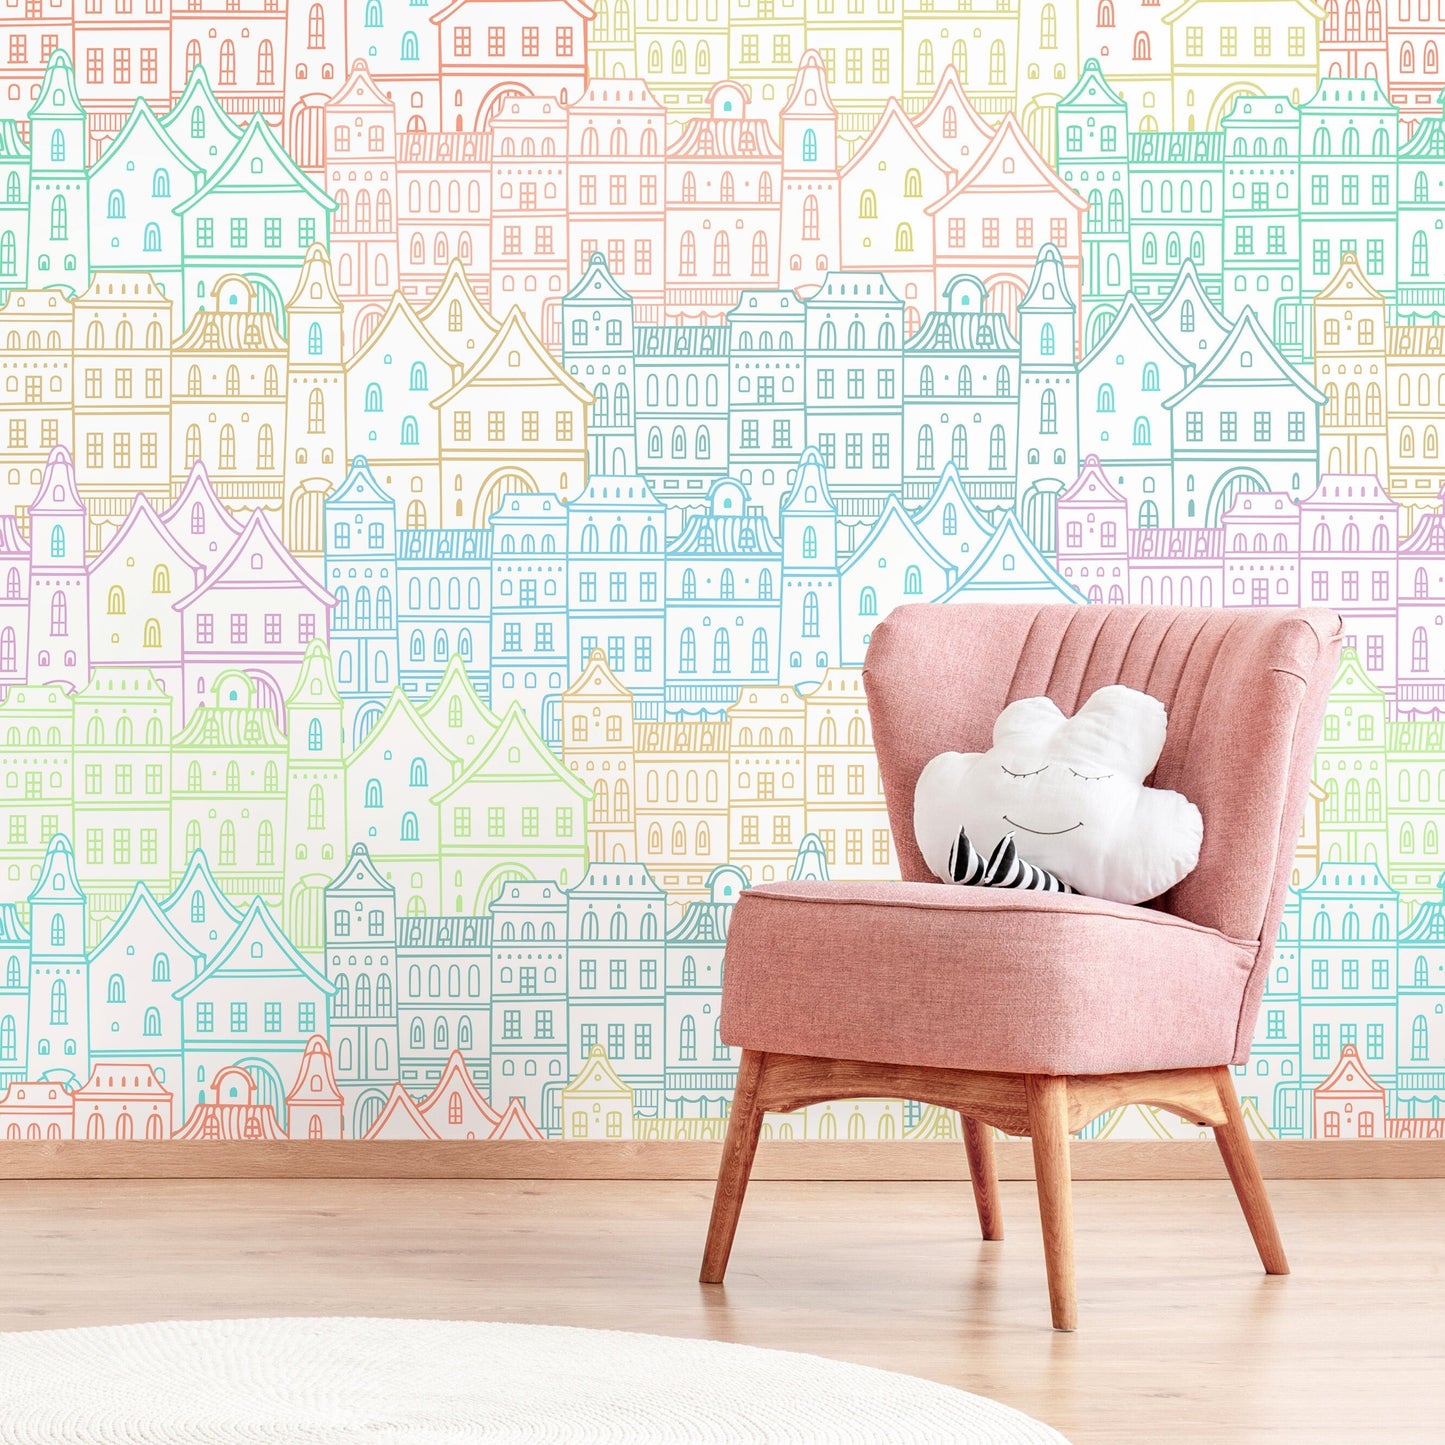 Colorful Cities Mural Vibrant Self-Adhesive Temporary Removable Wallpaper - A743